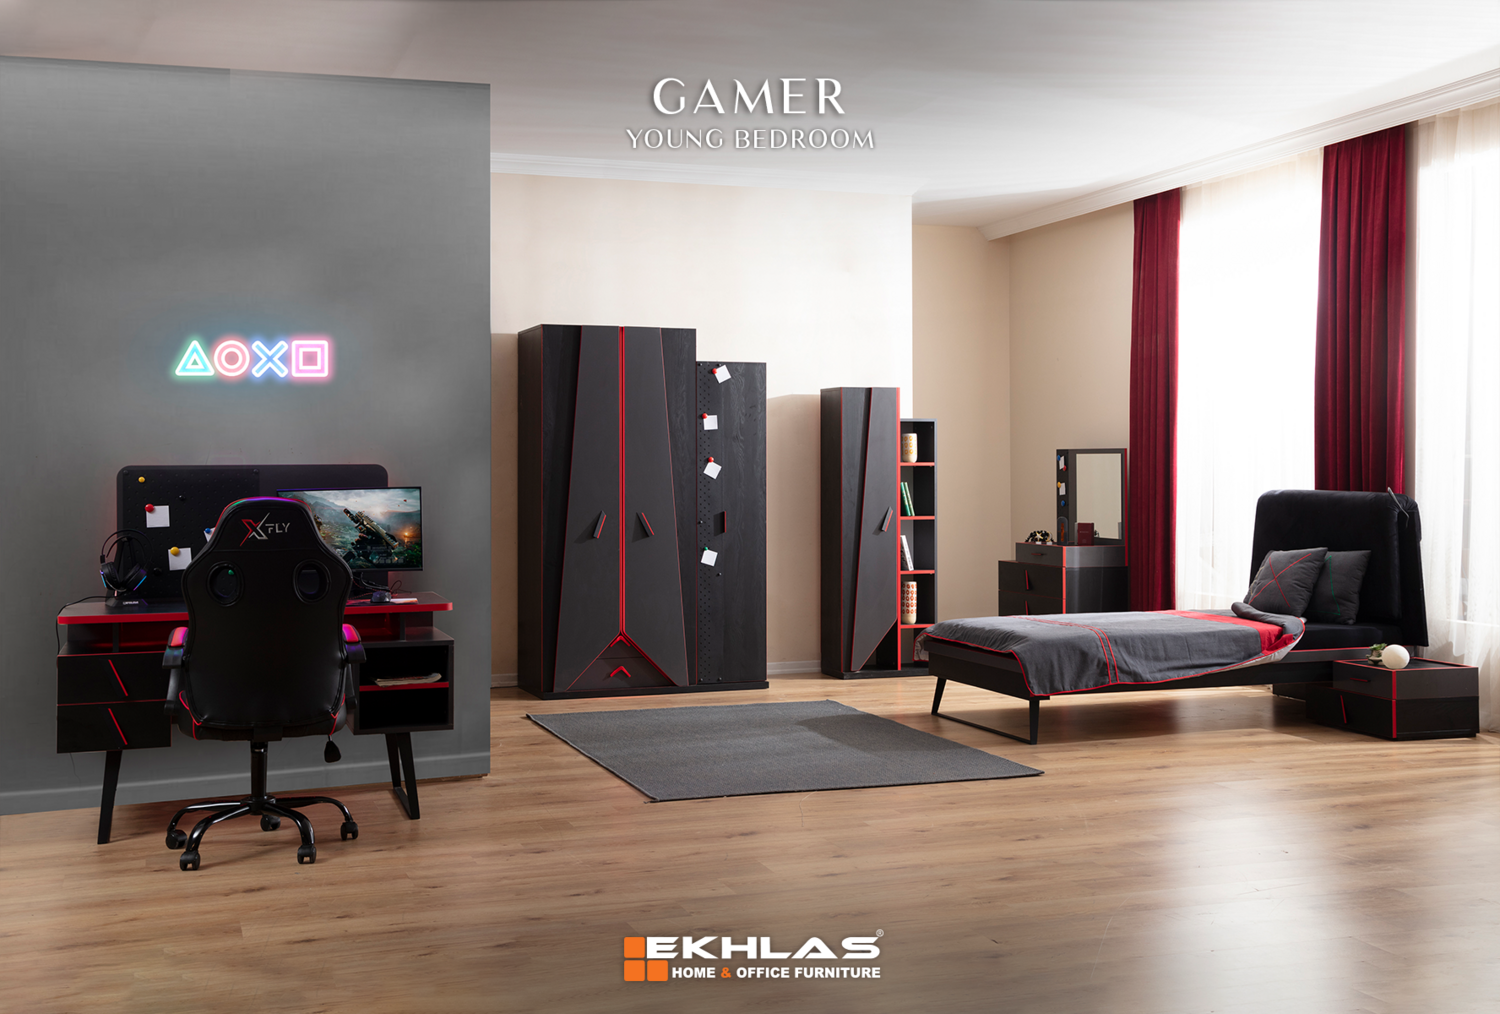 Gamer Young bedroom